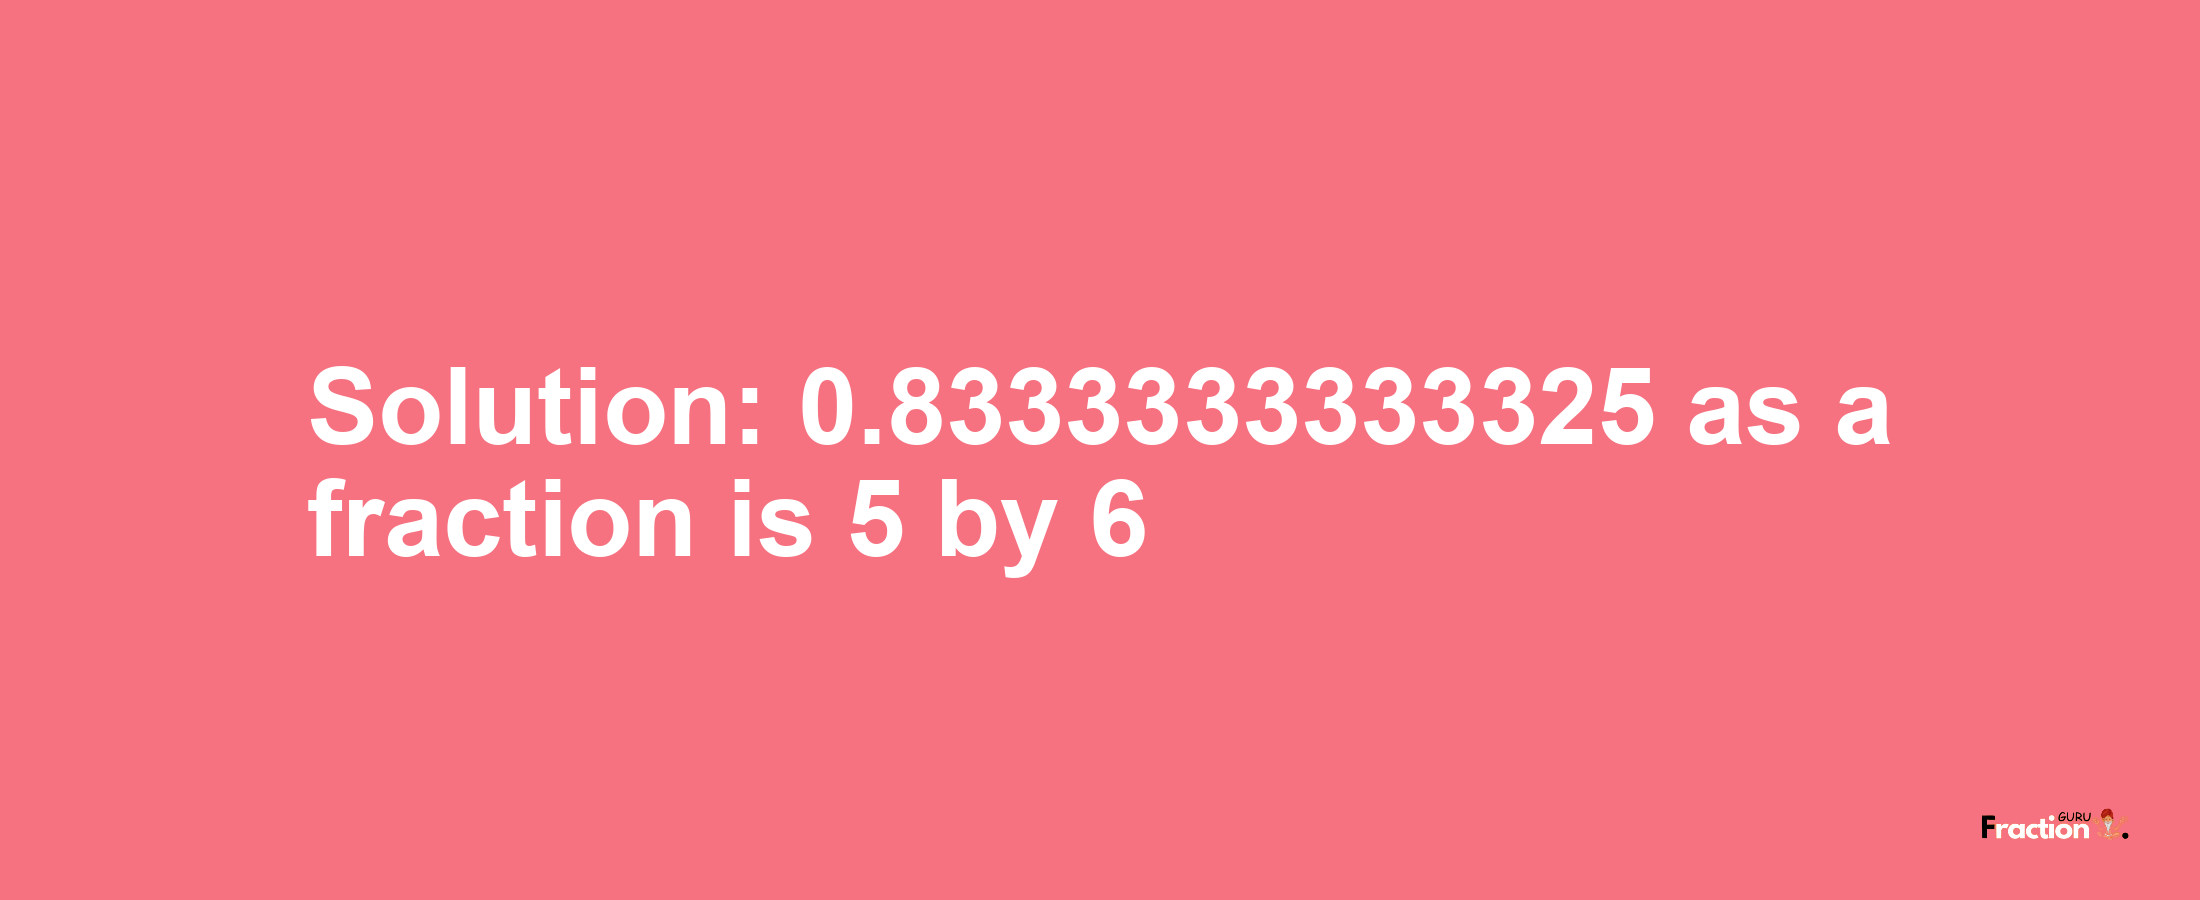 Solution:0.8333333333325 as a fraction is 5/6